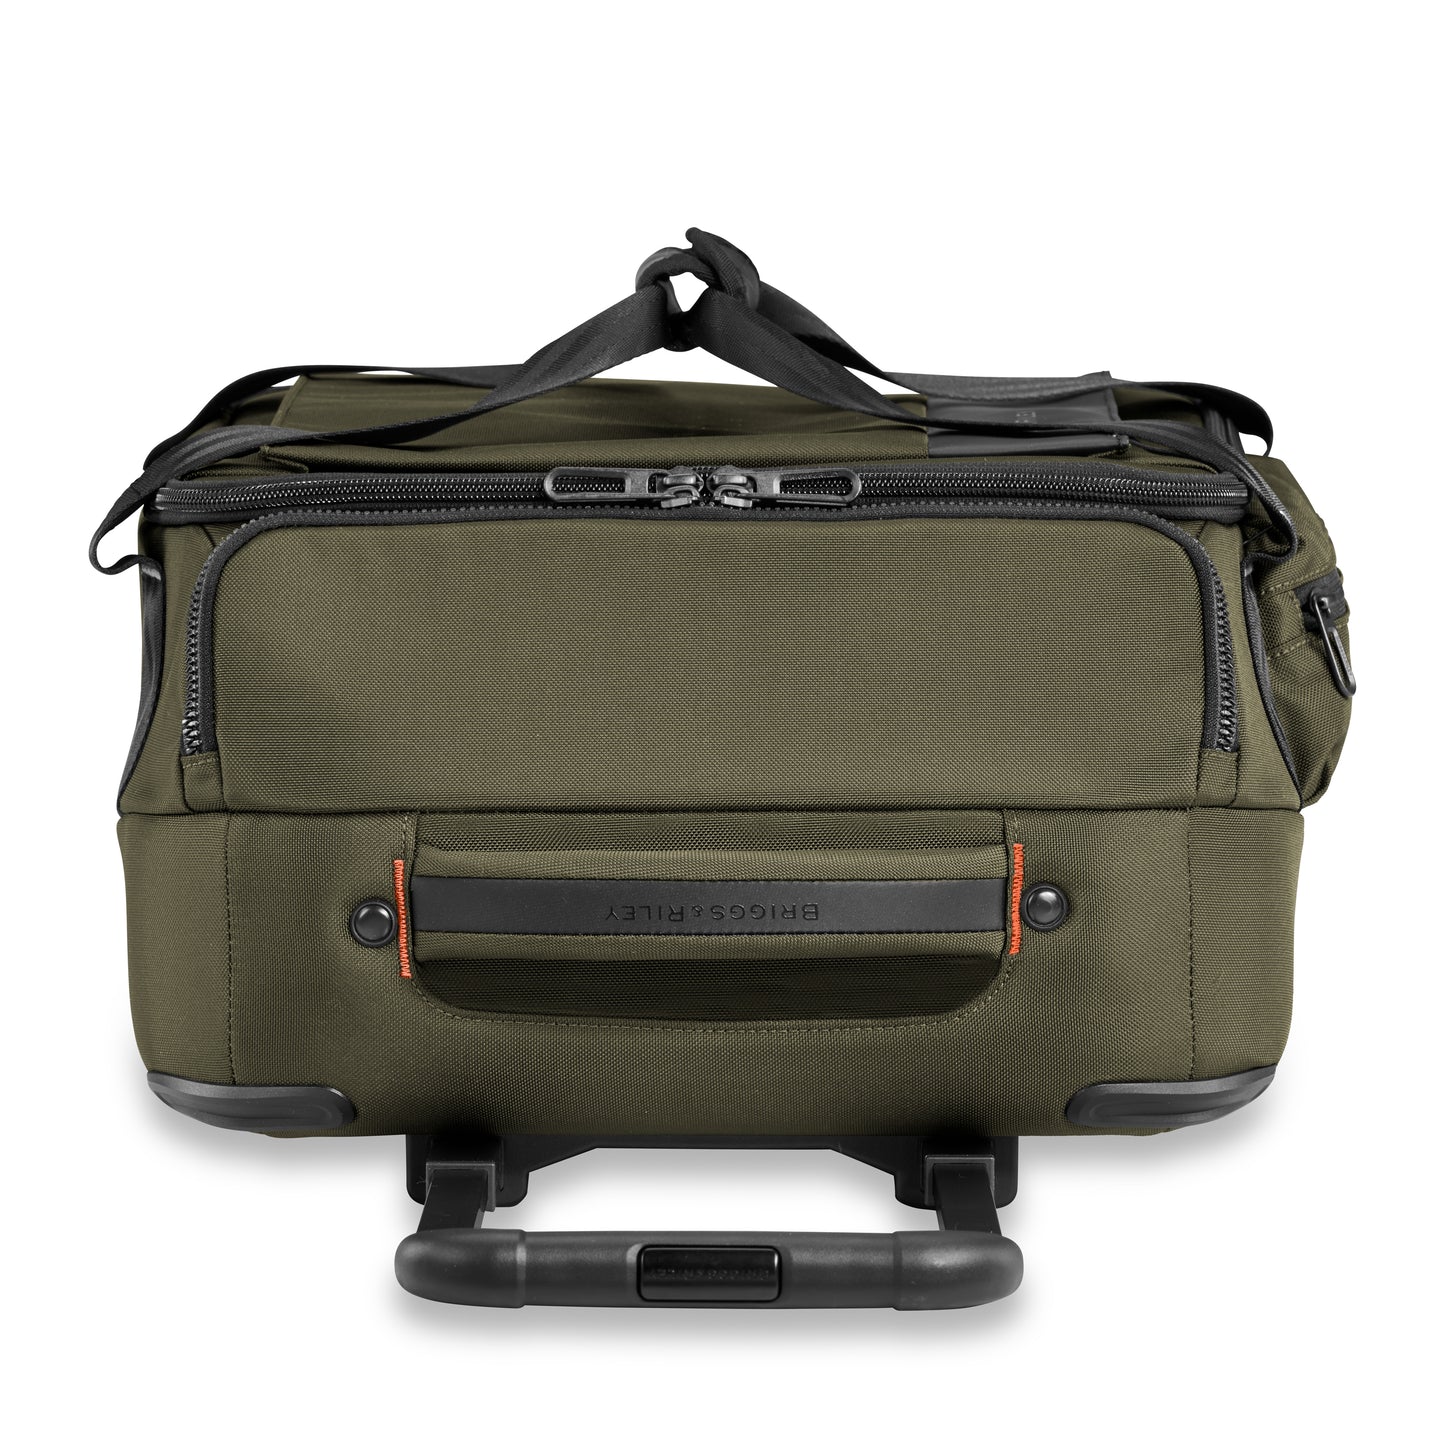 Briggs & Riley ZDX 21" Carry-On 2 Wheel Duffle